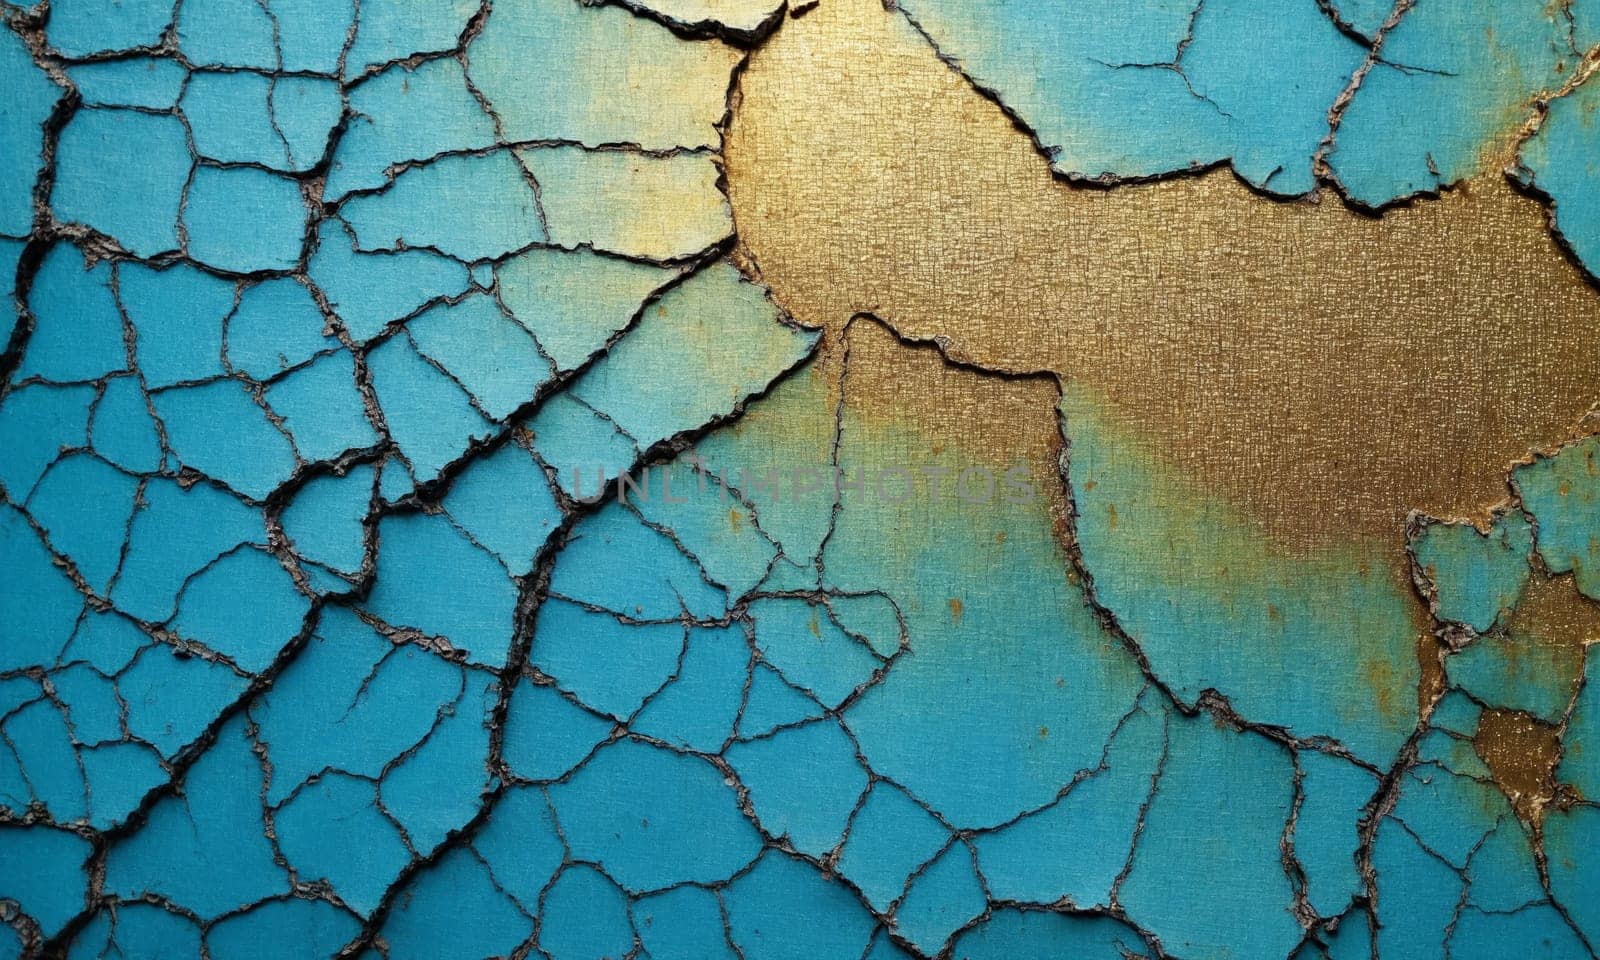 Old cracked blue paint on a wall. Abstract background for design